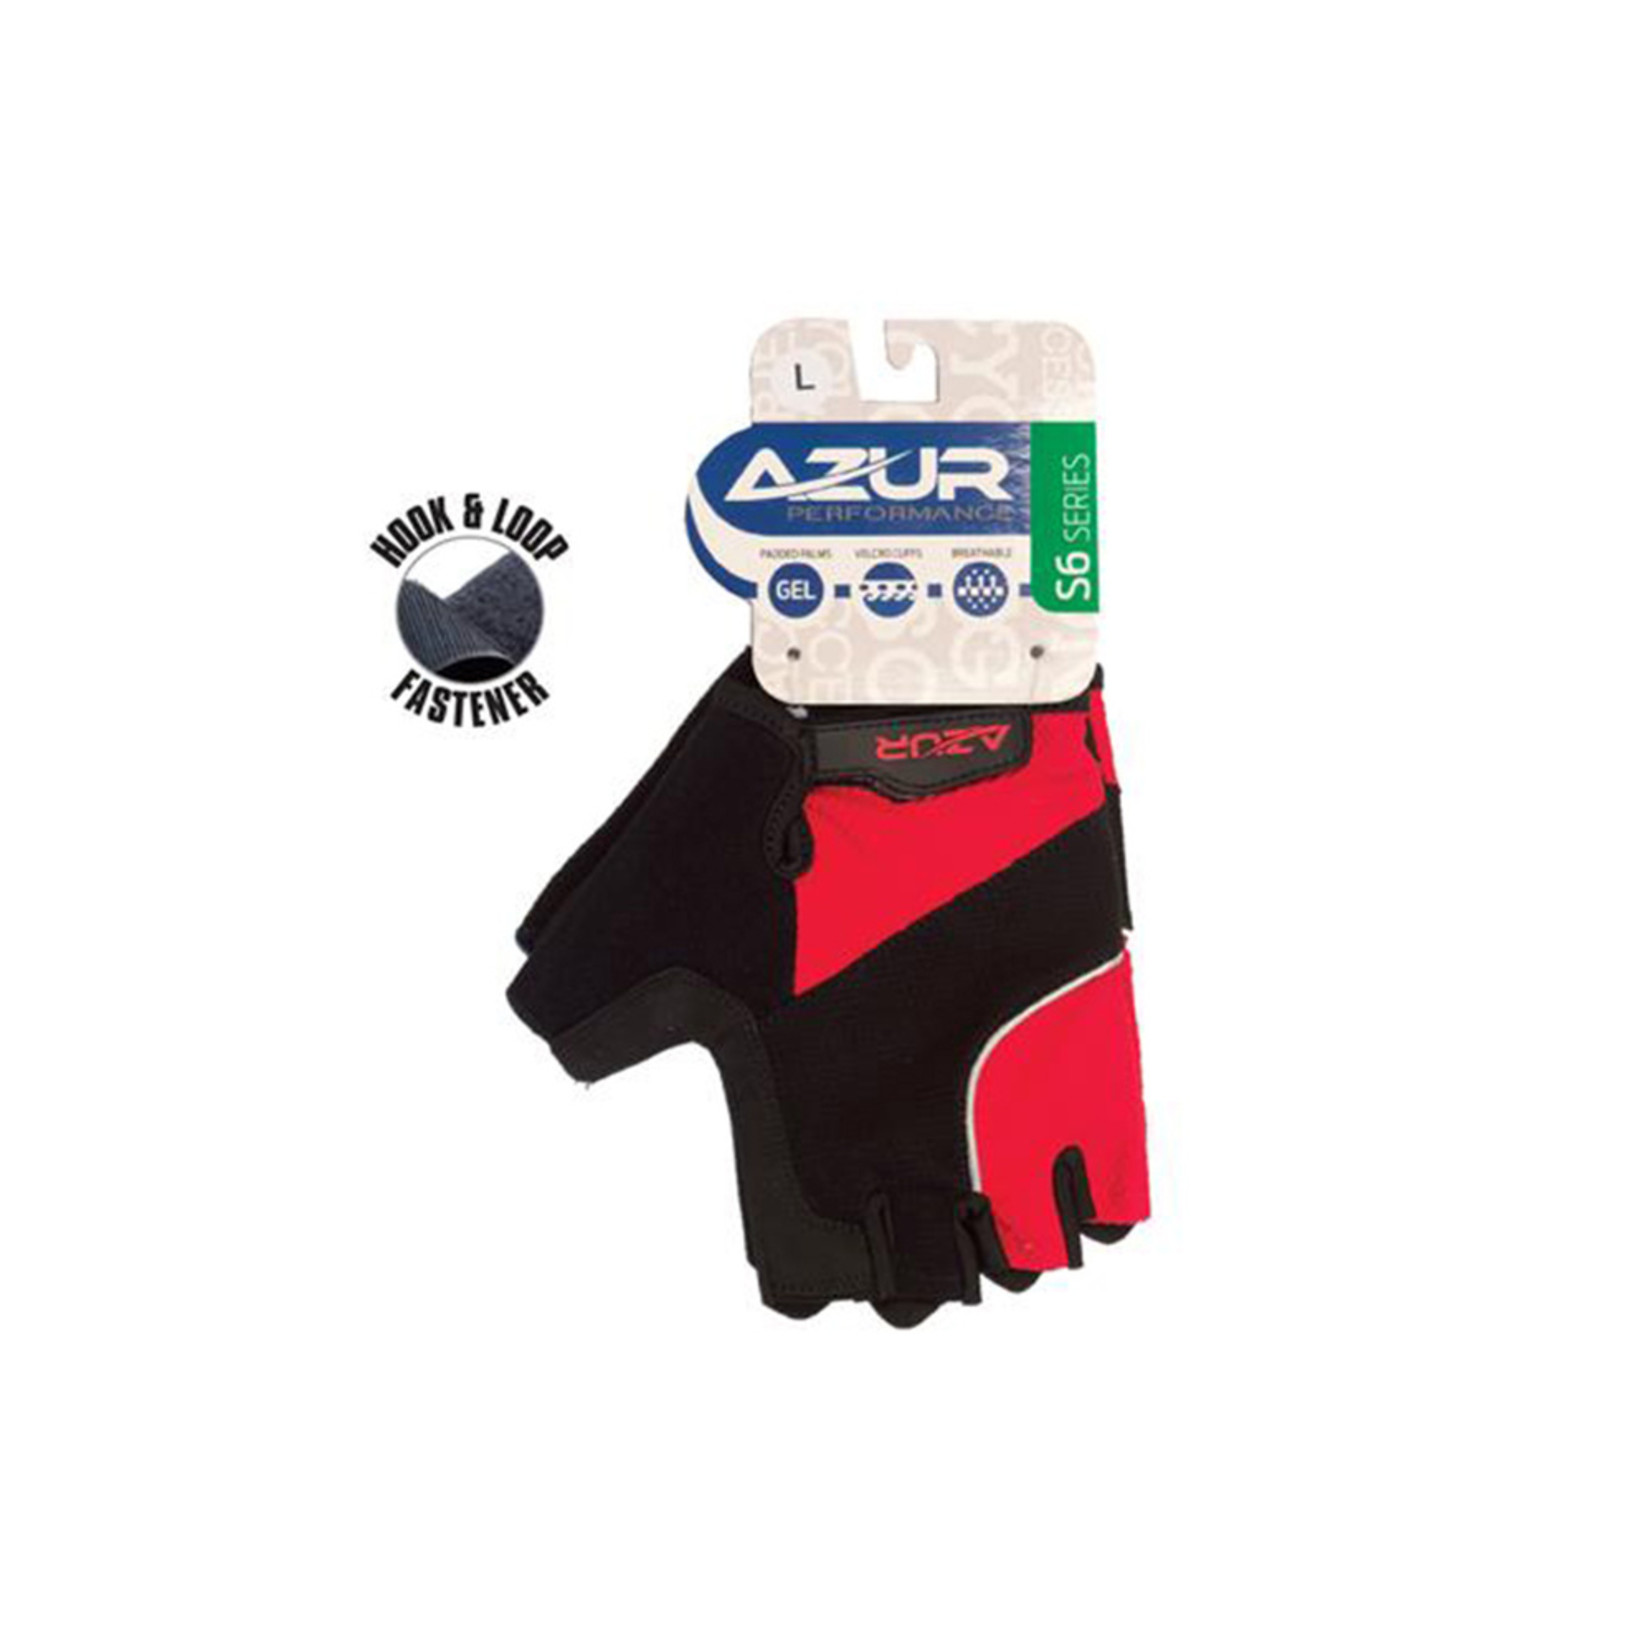 Azur Azur Bike/Cycling Glove - S6 Series - Synthetic Palm - Red - Small